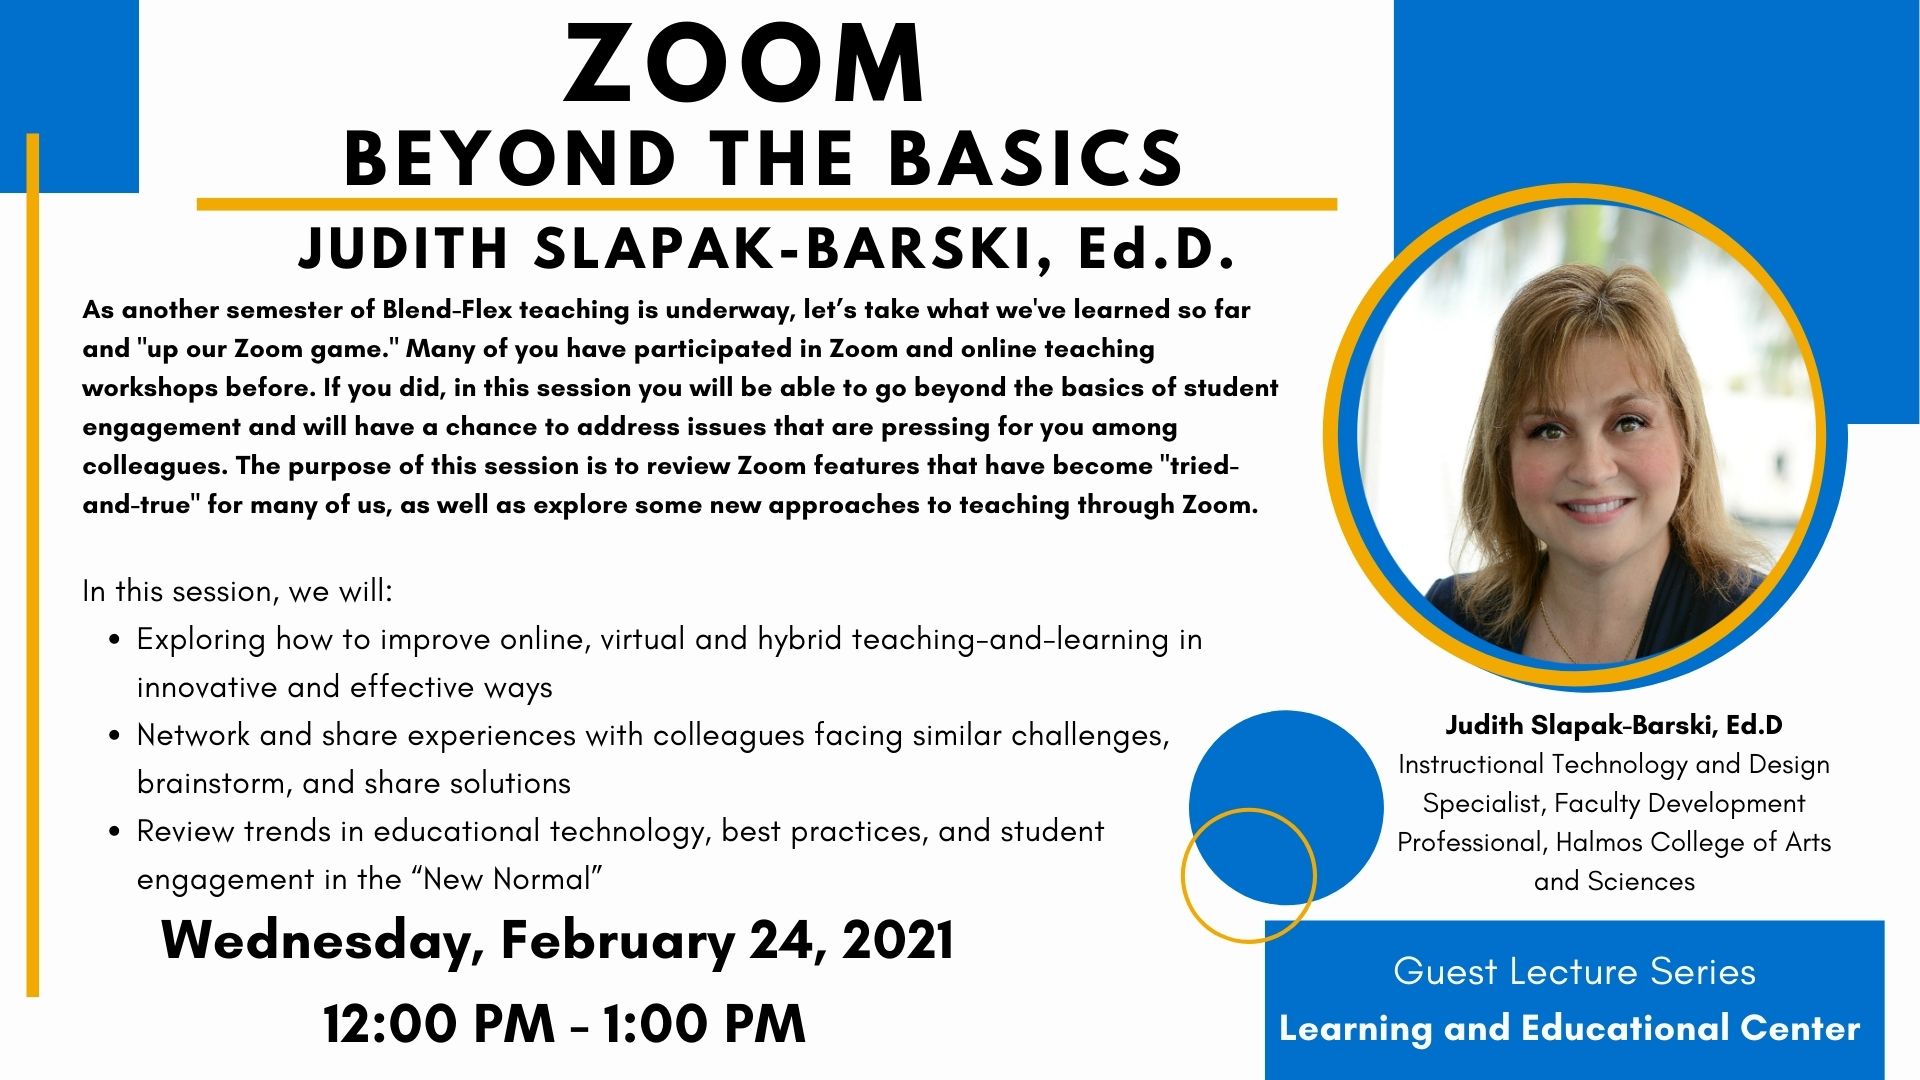 LEC-Guest-Lecture-Series-Zoom-Beyond-the-Basics.jpg